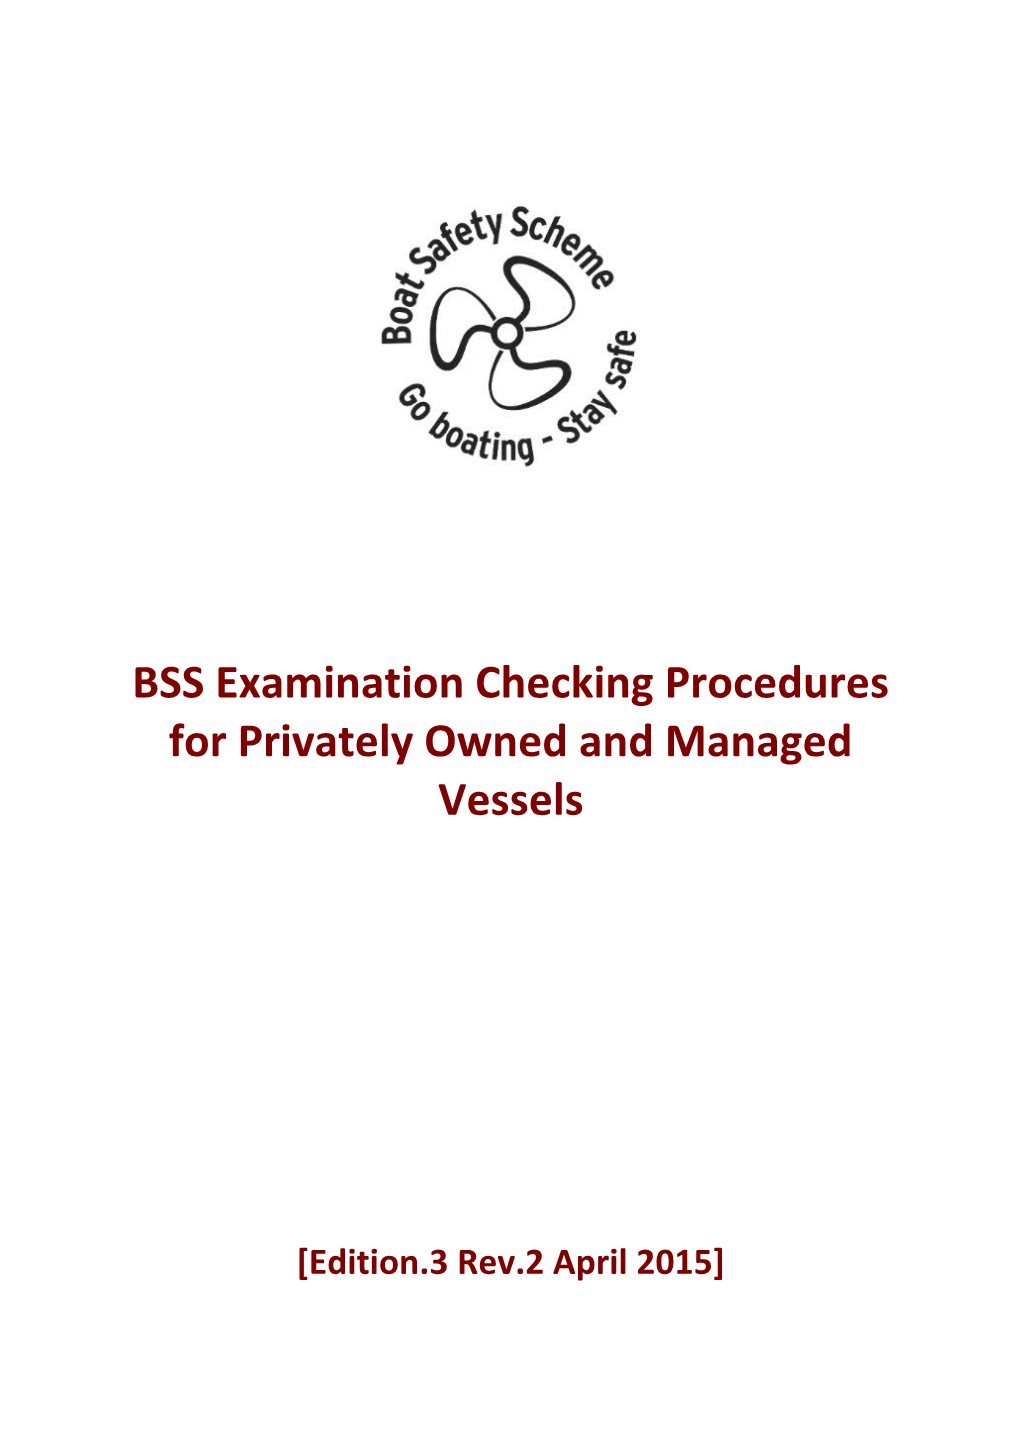 BSS Examination Checking Procedures for Privately Owned and Managed Vessels